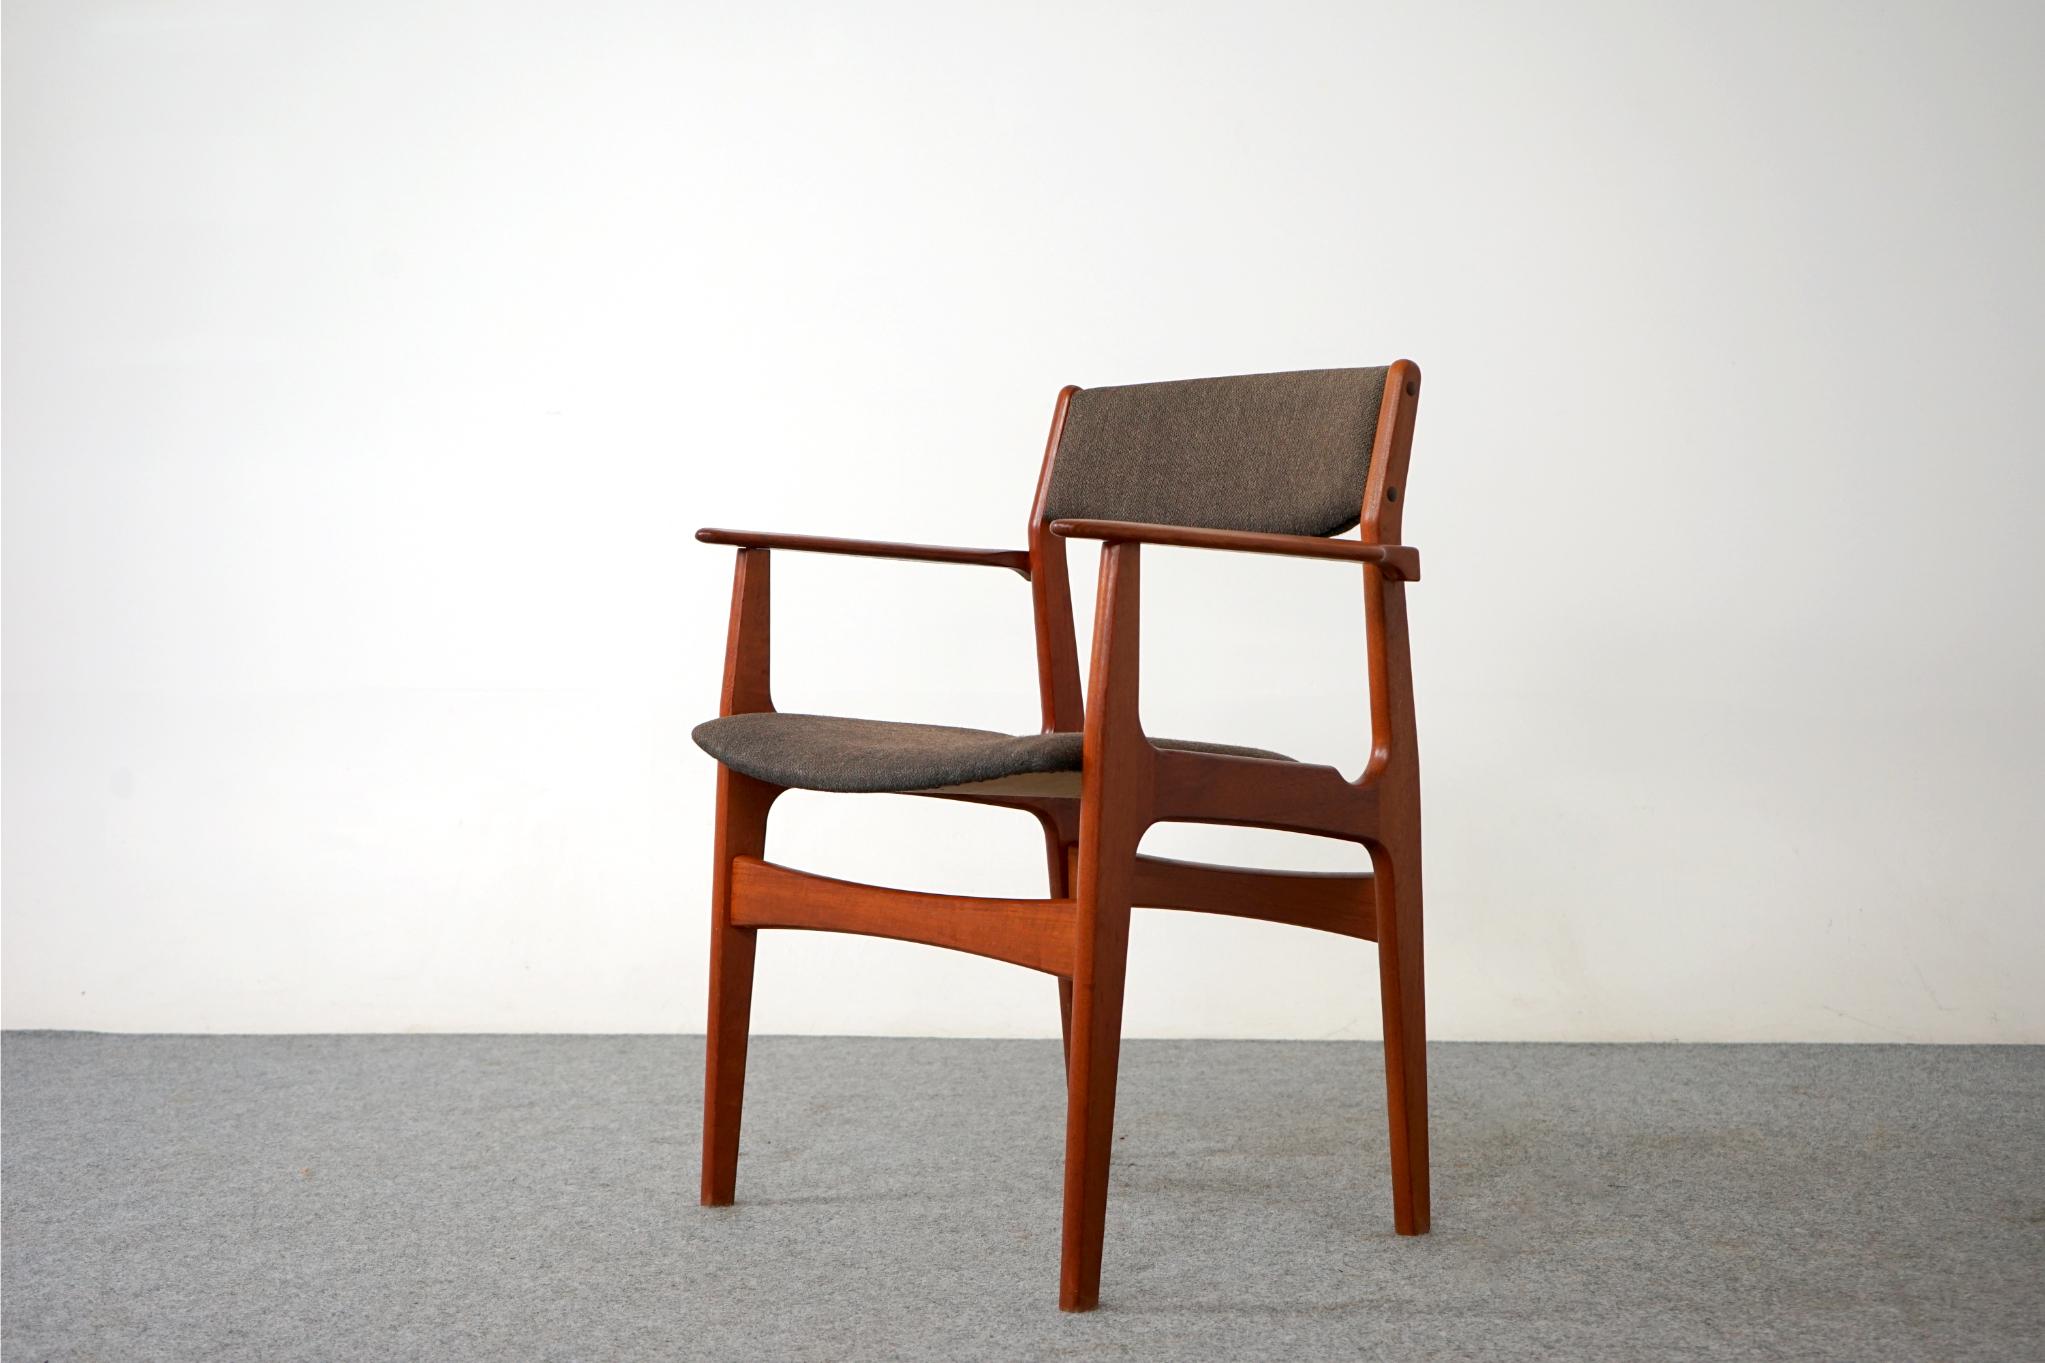 Teak arm chair, circa 1960's. Solid wood frame with upright upholstered back provides support and comfort. This beautifully sculpted frame offers comfort without an imposing footprint. Clean modern design makes it easy to combine with other